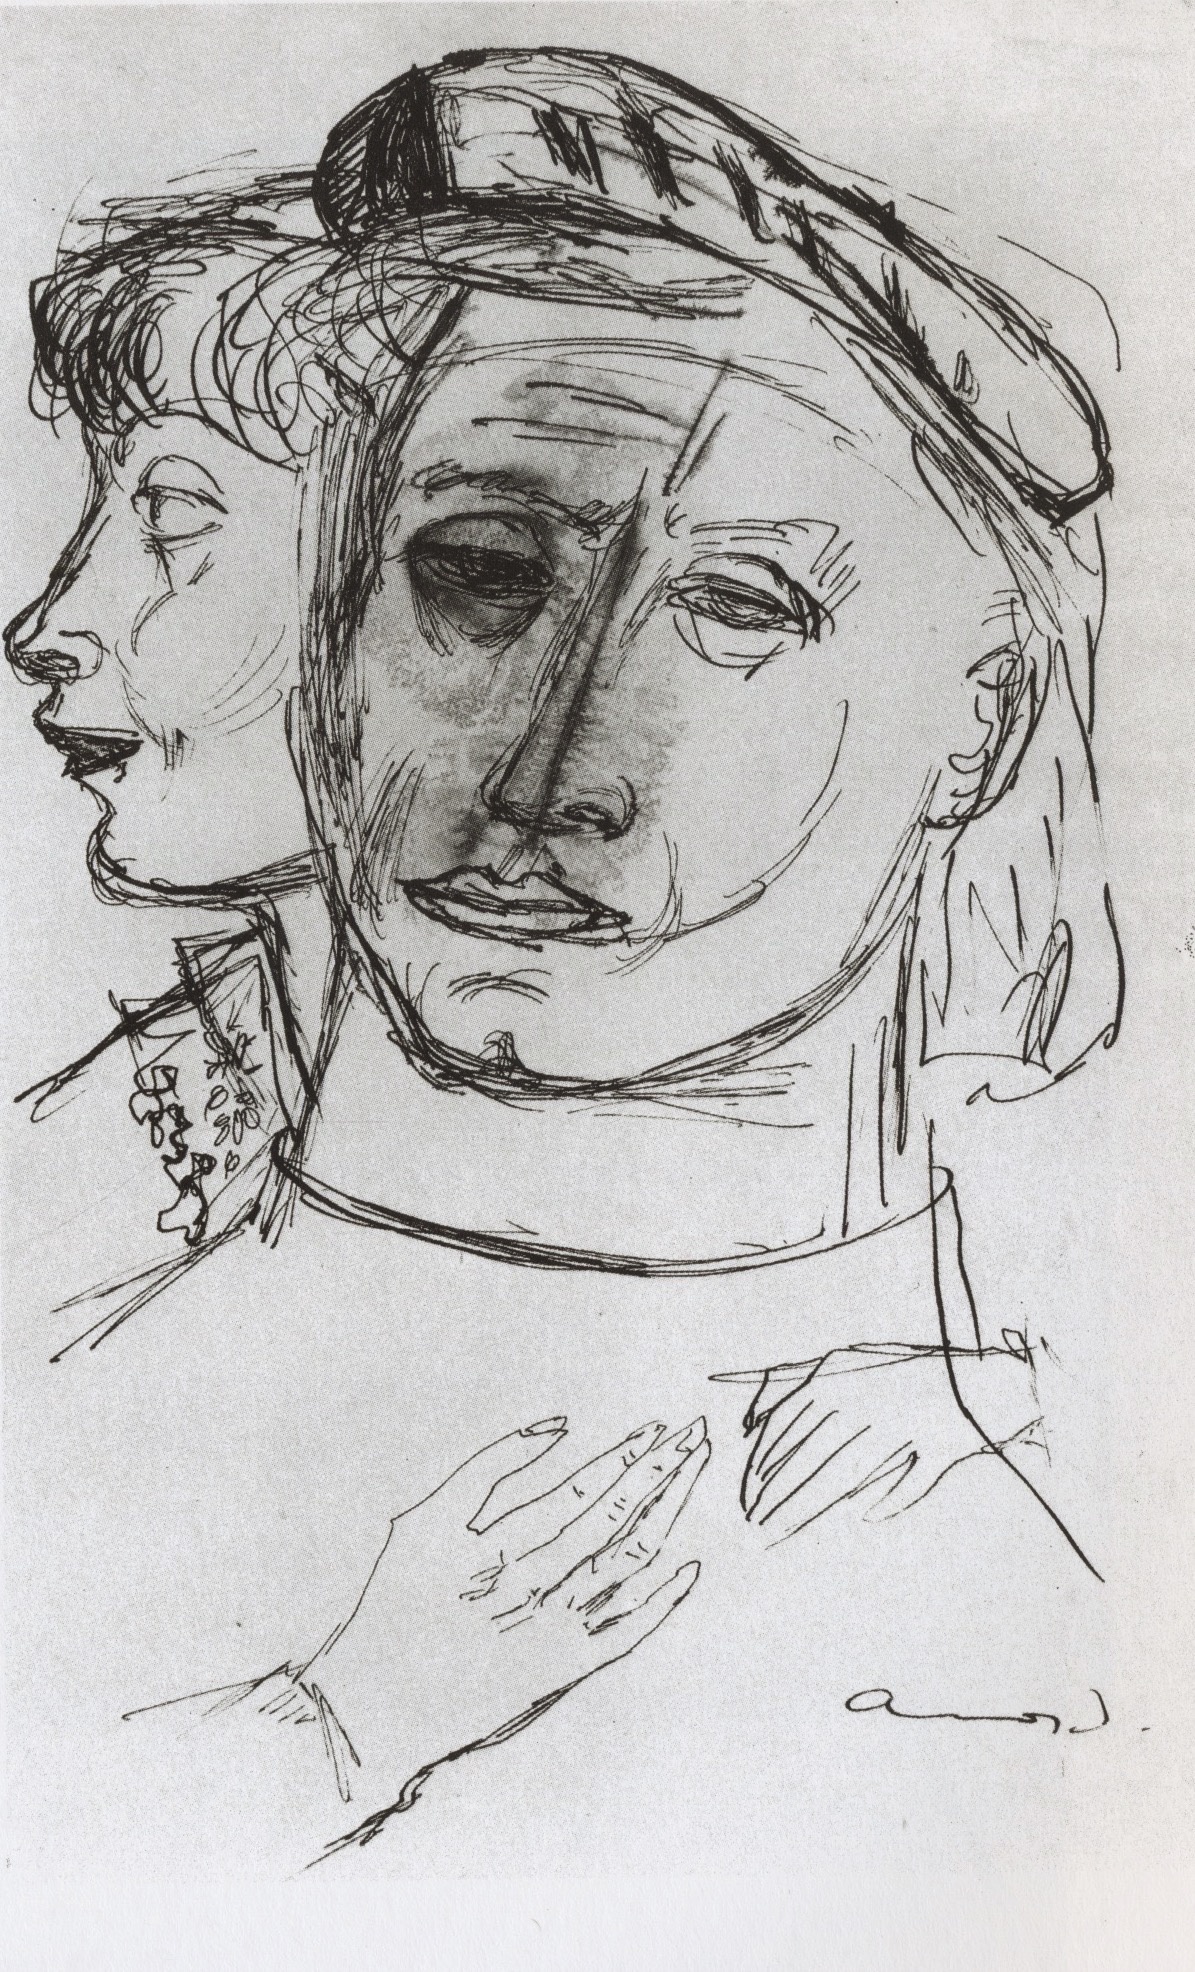 Imre Ámos: untitled (known as “Portrait of Margit & Imre”) (The Salgo Trust for Education CC BY-NC-SA)